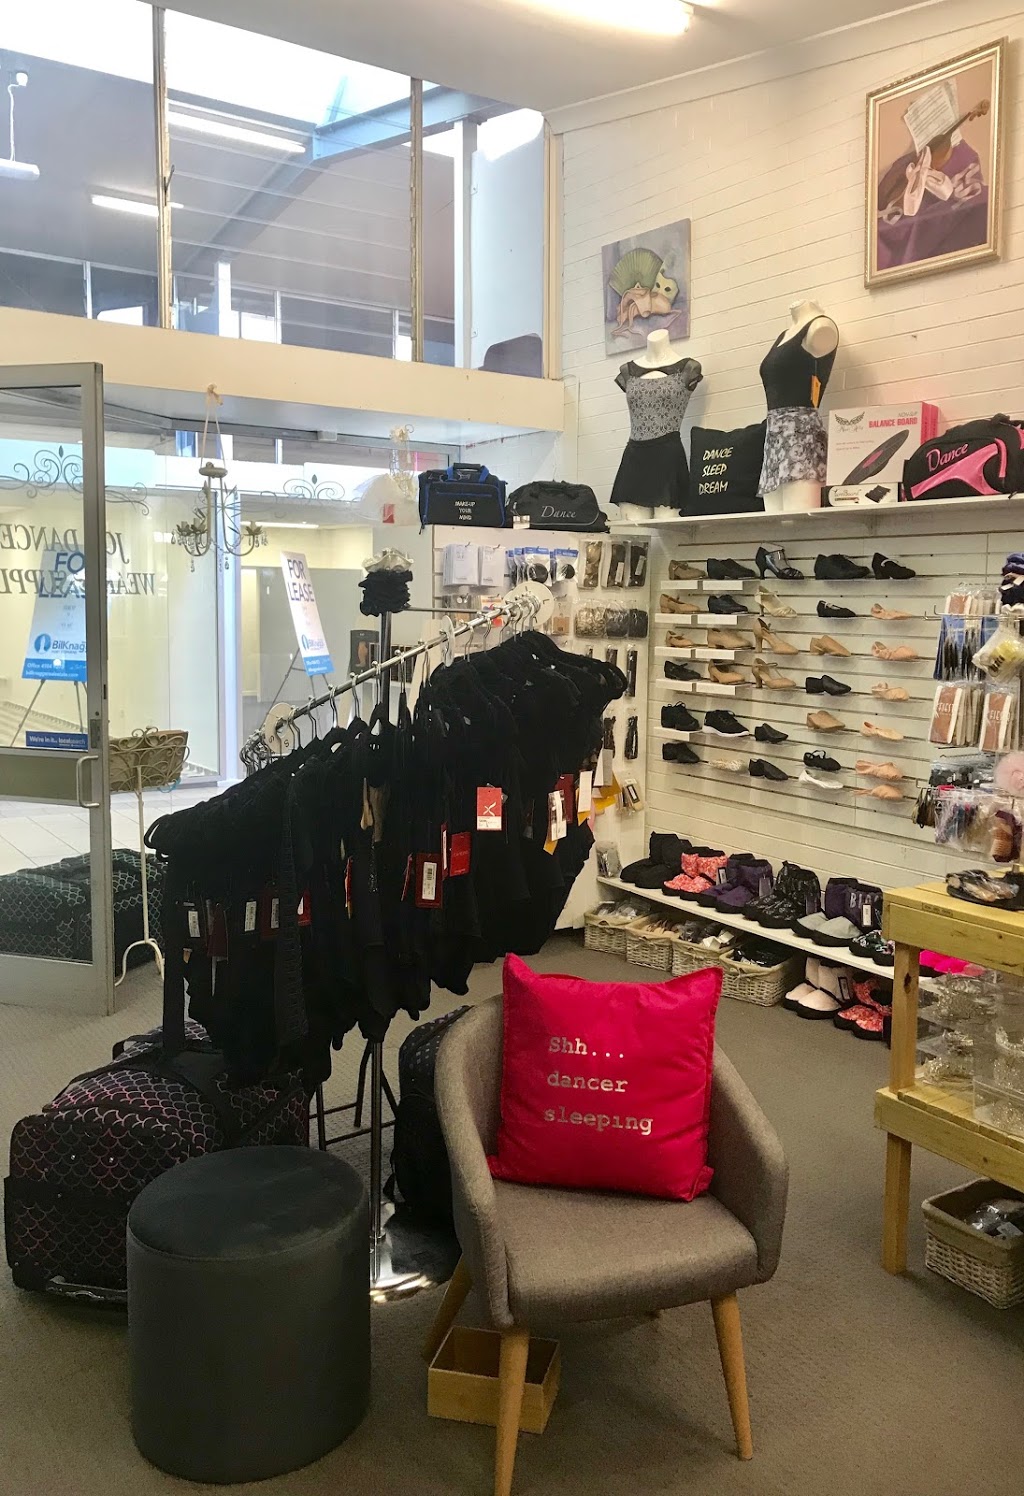 Jos dance wear and supplies | store | 4169 Nelson Bay Rd, Anna Bay NSW 2316, Australia | 0423246277 OR +61 423 246 277